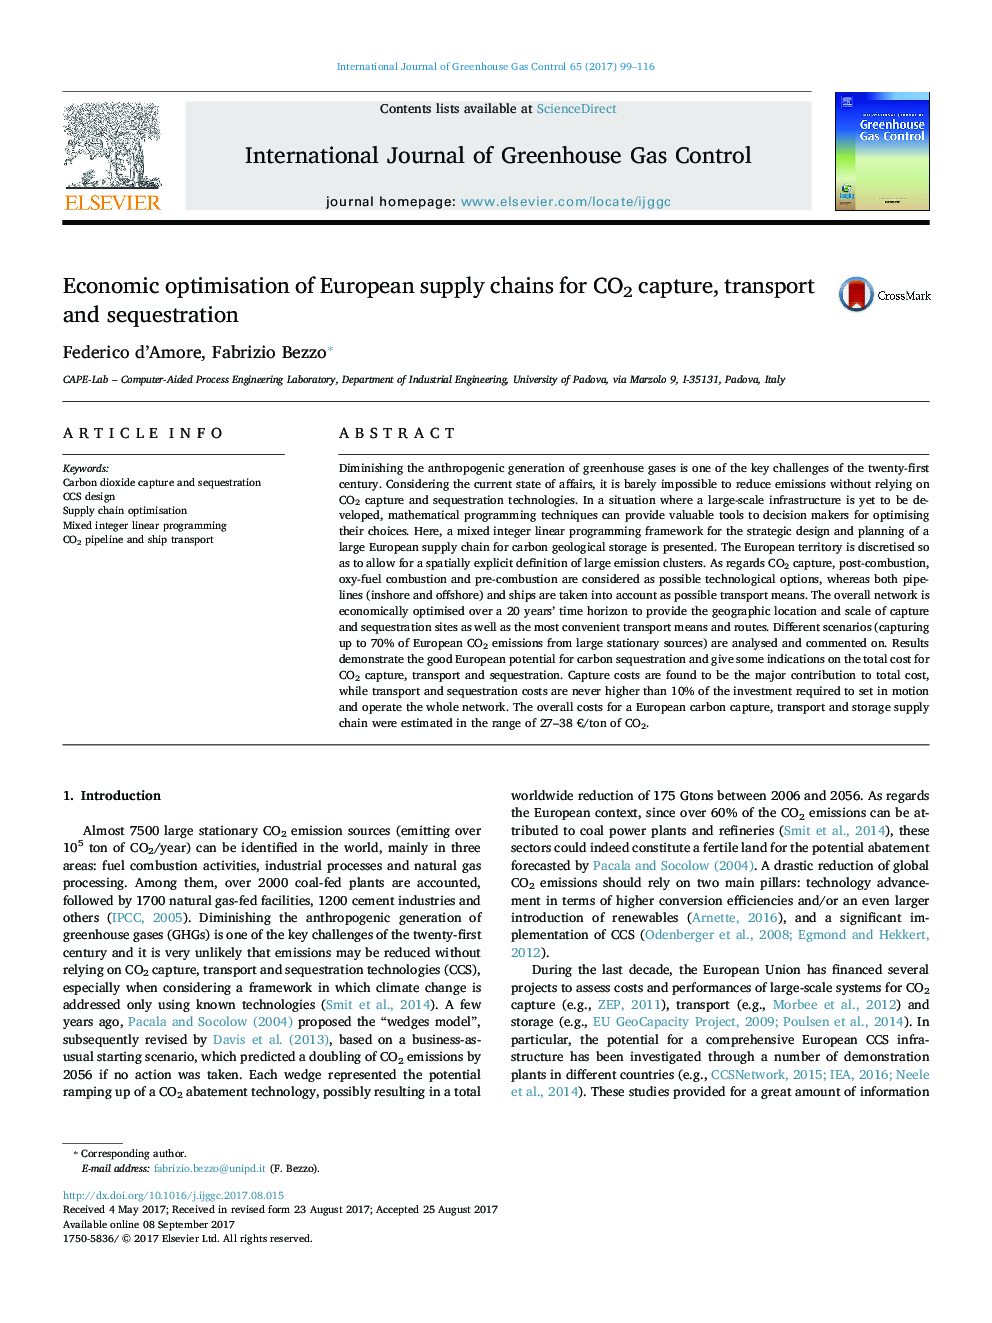 Economic optimisation of European supply chains for CO2 capture, transport and sequestration